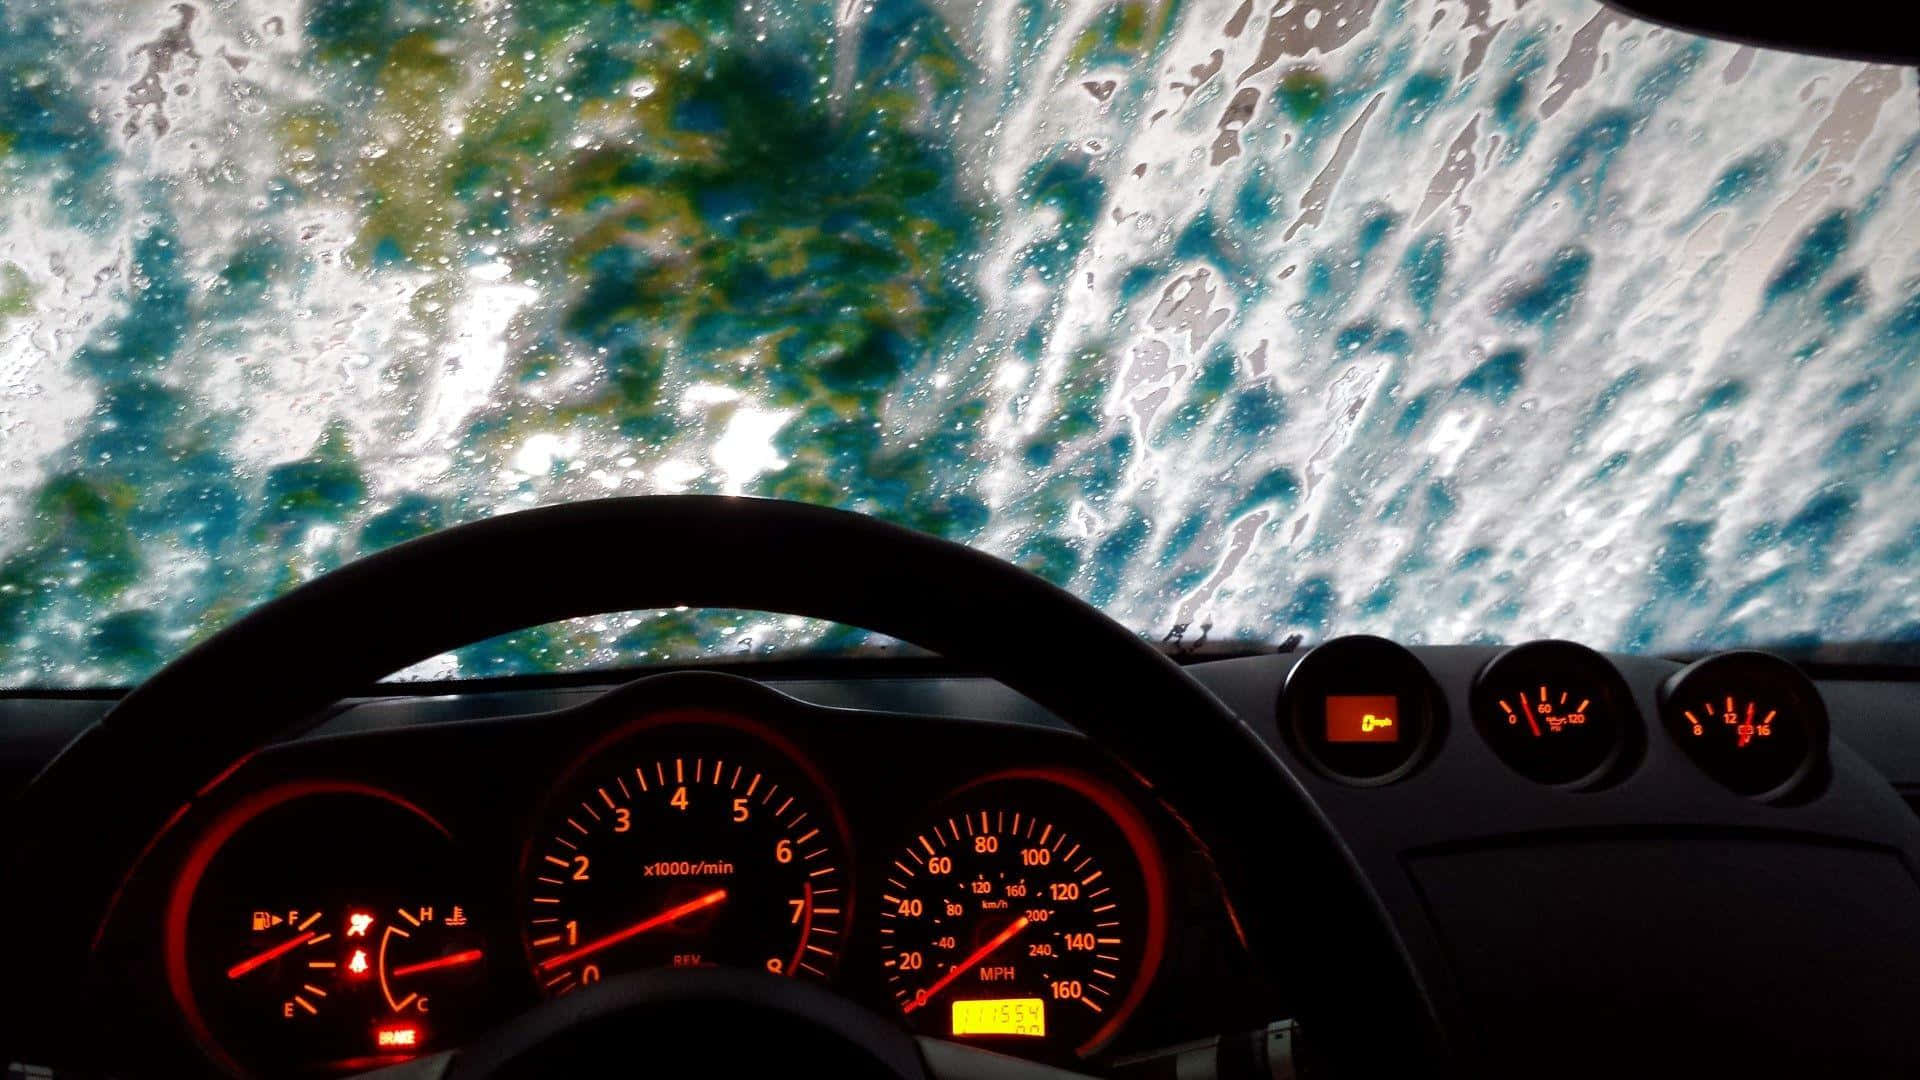 Give your car a deep clean and a brilliant shine with a car wash!